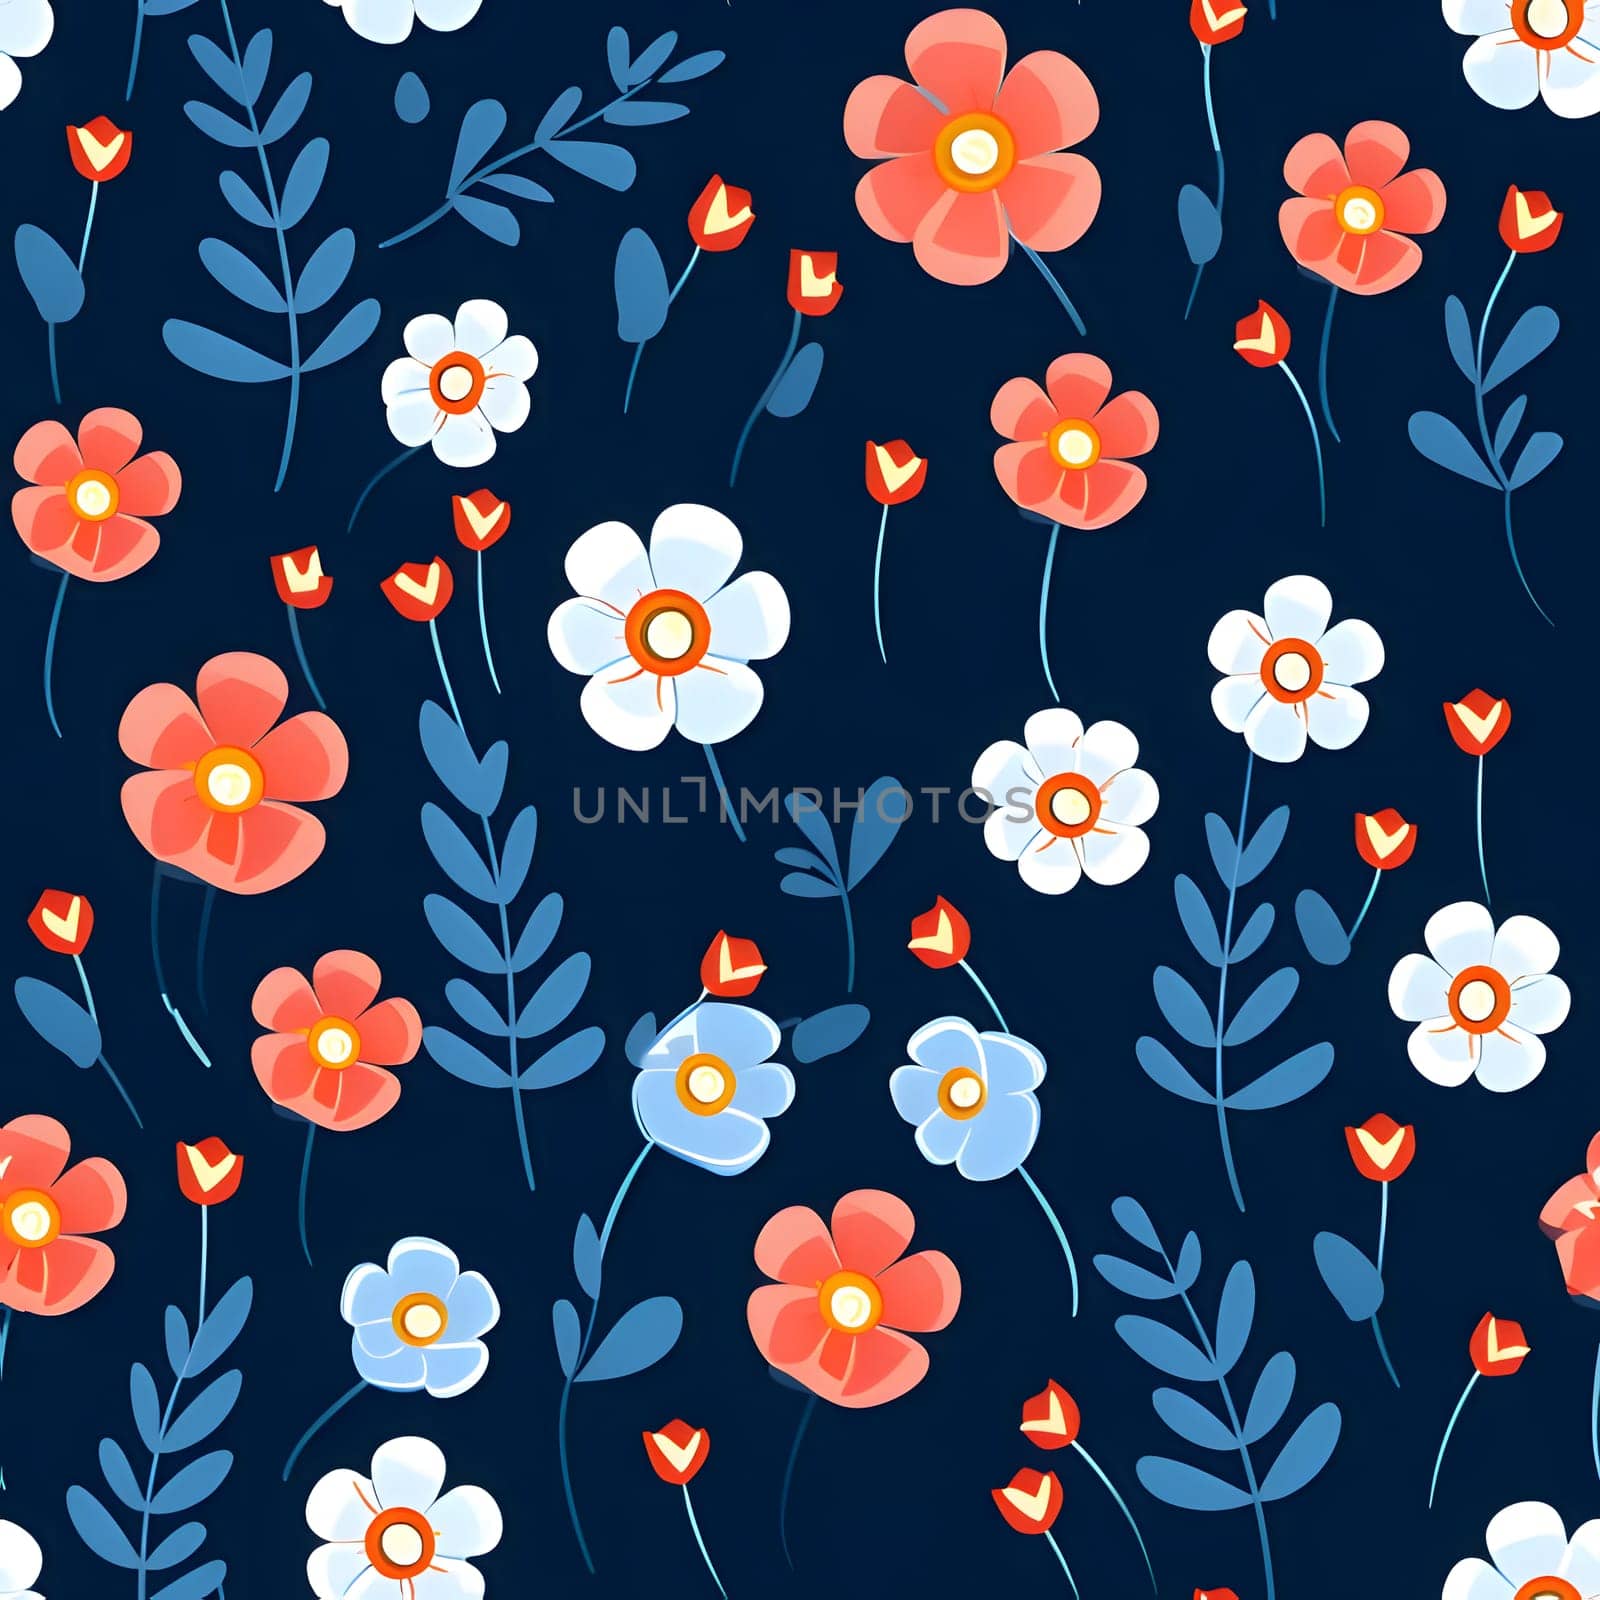 Patterns and banners backgrounds: Seamless pattern with flowers and leaves on dark blue background.